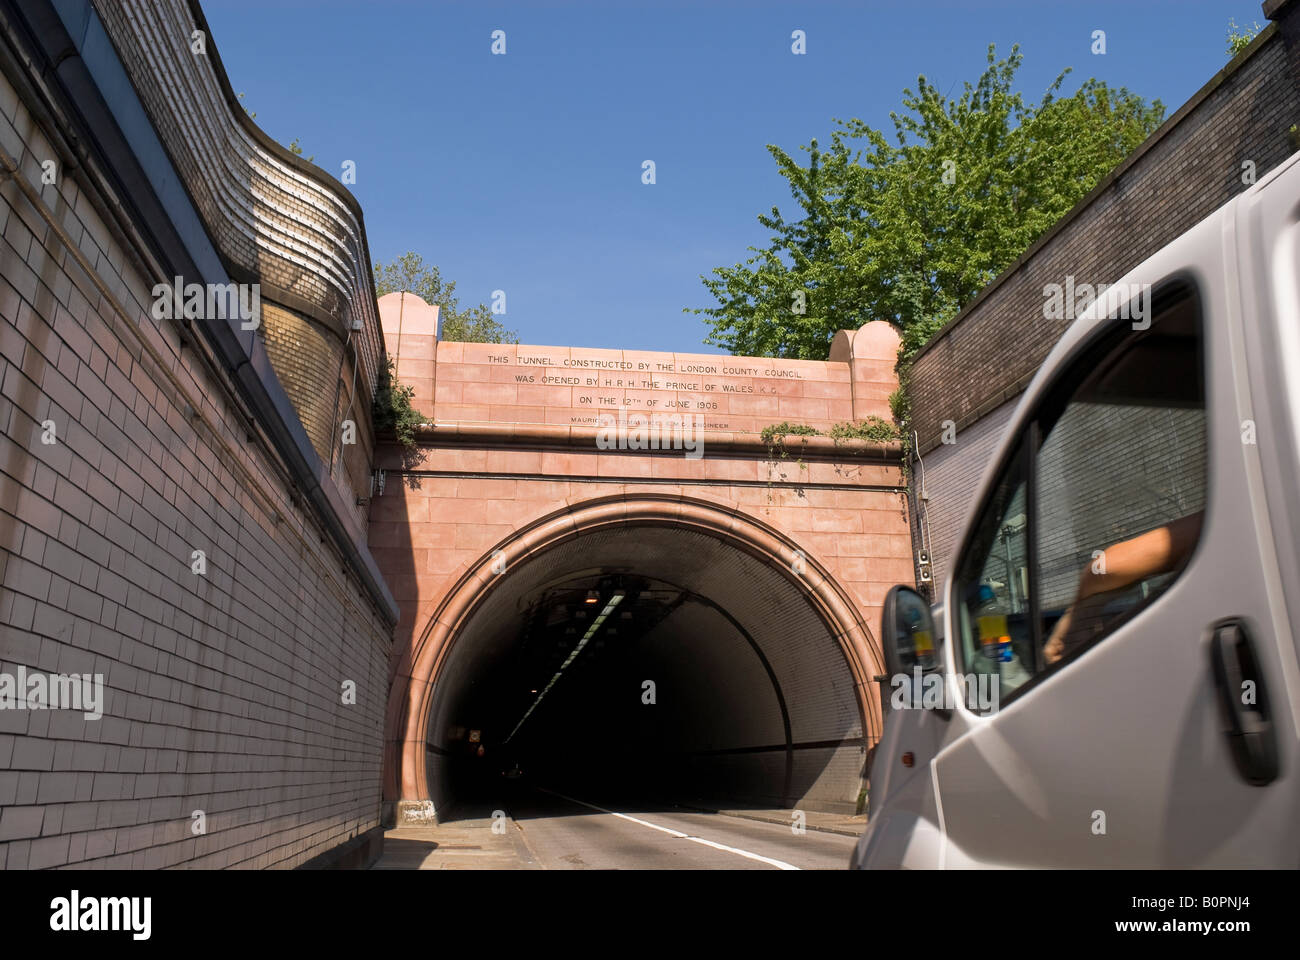 White van entering the Surrey side of the Rotherhithe Road Tunnel, London Stock Photo